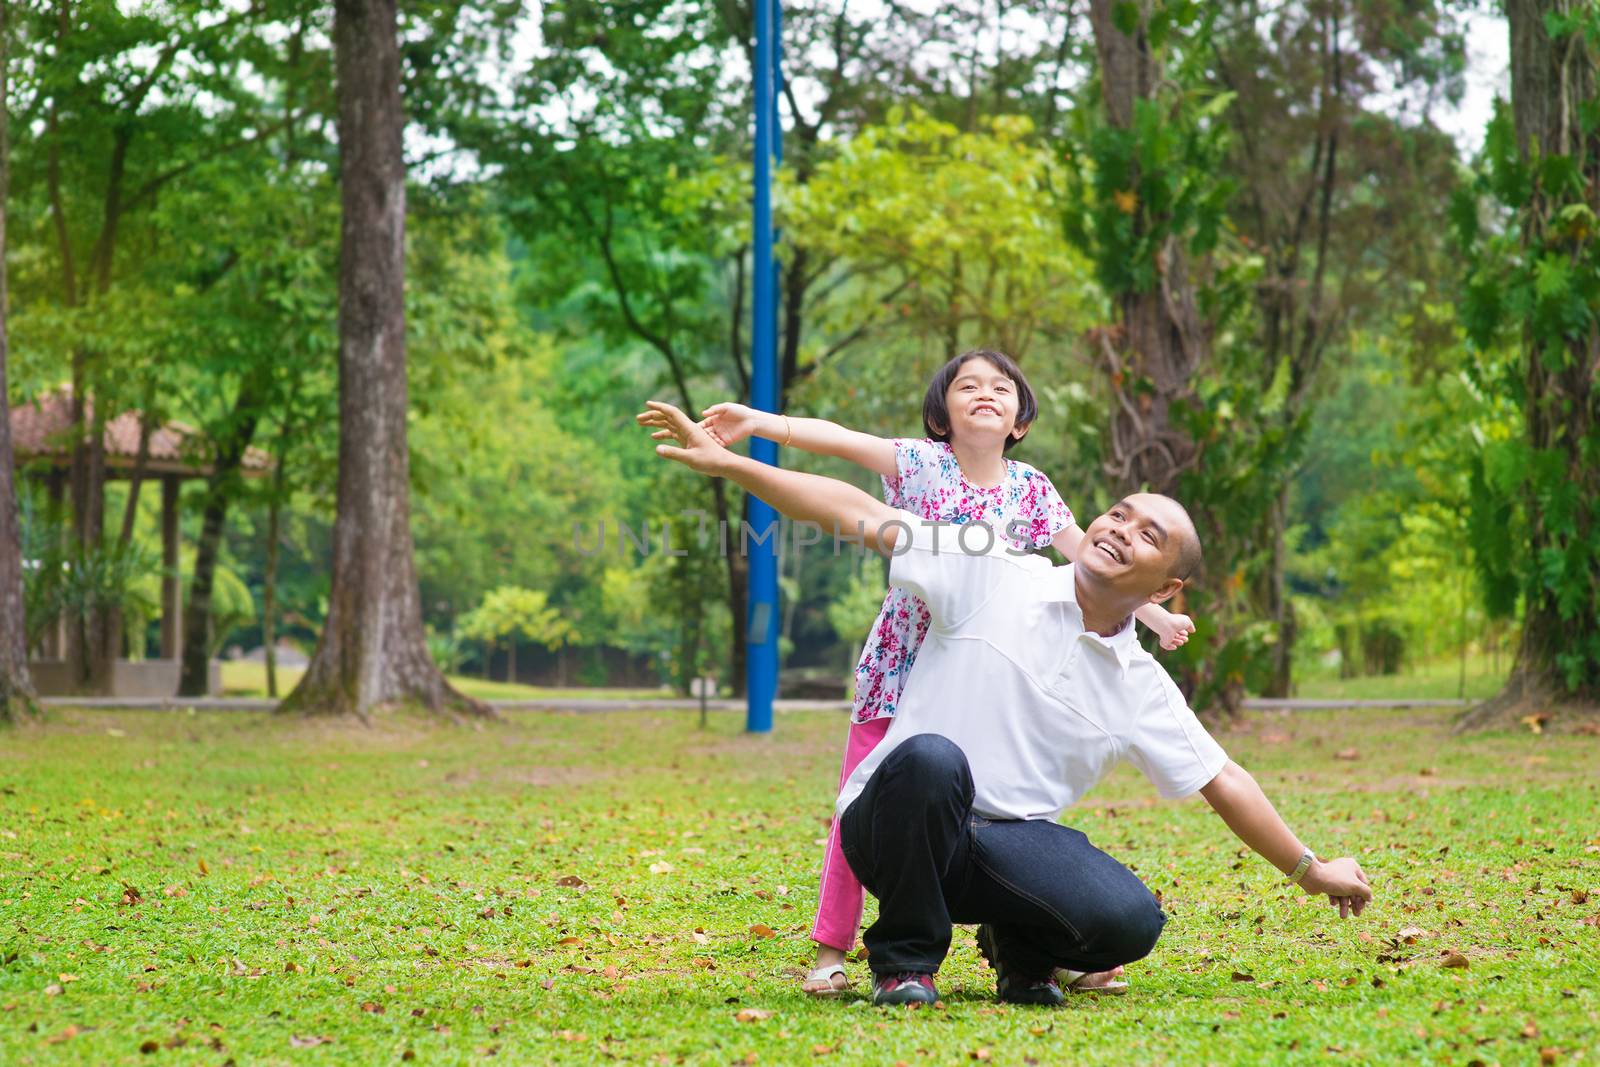 Father and daughter playing at outdoor garden park. Happy Southeast Asian family living lifestyle.